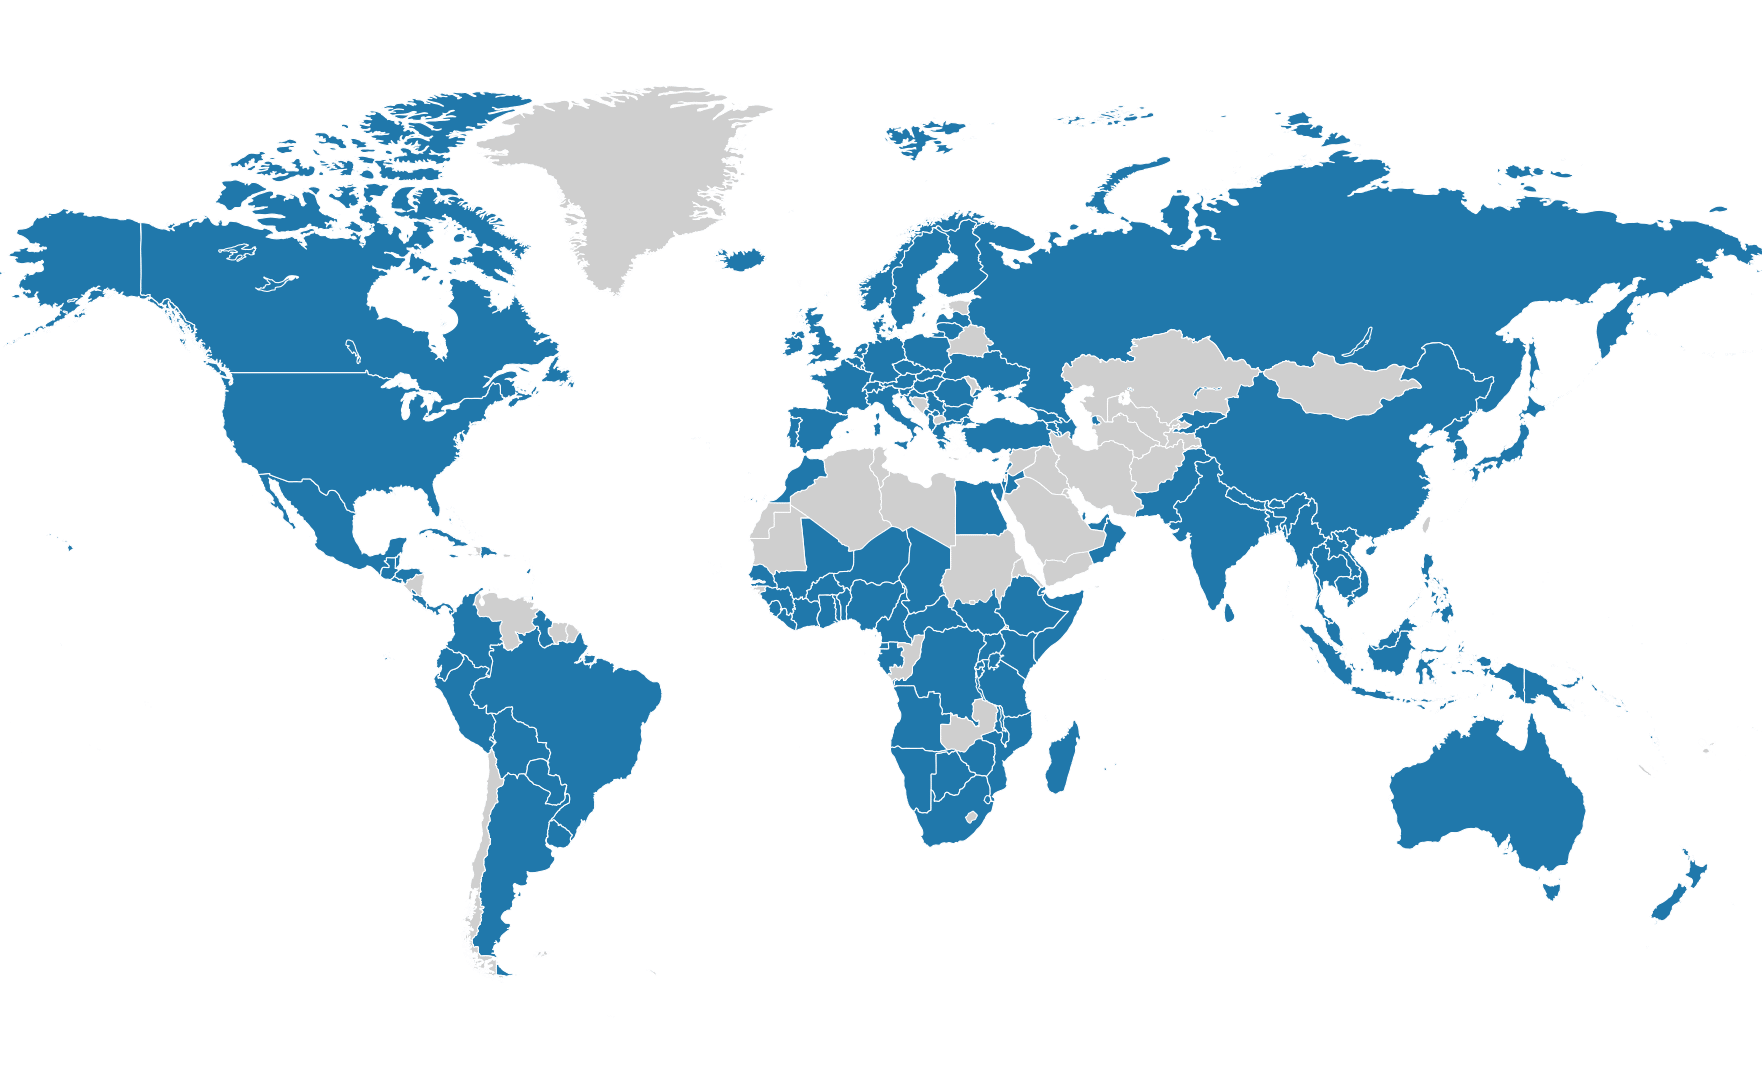 Countries highlighted in blue have policies containing Nature-based Solutions and are detailed in our database.